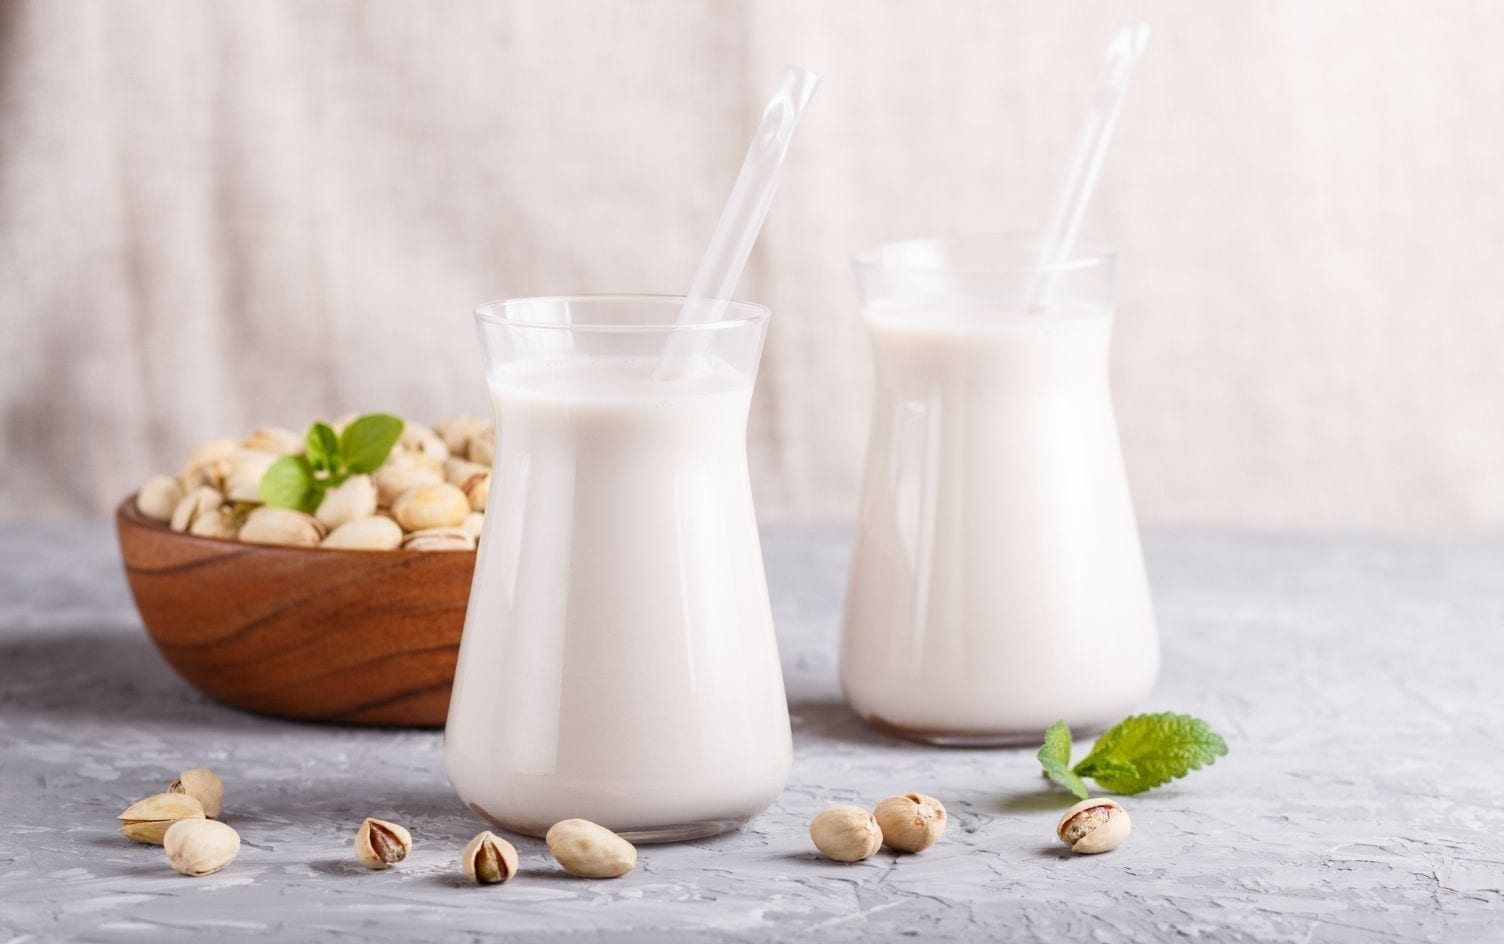 What to Know About the Latest Nut-Based Milk